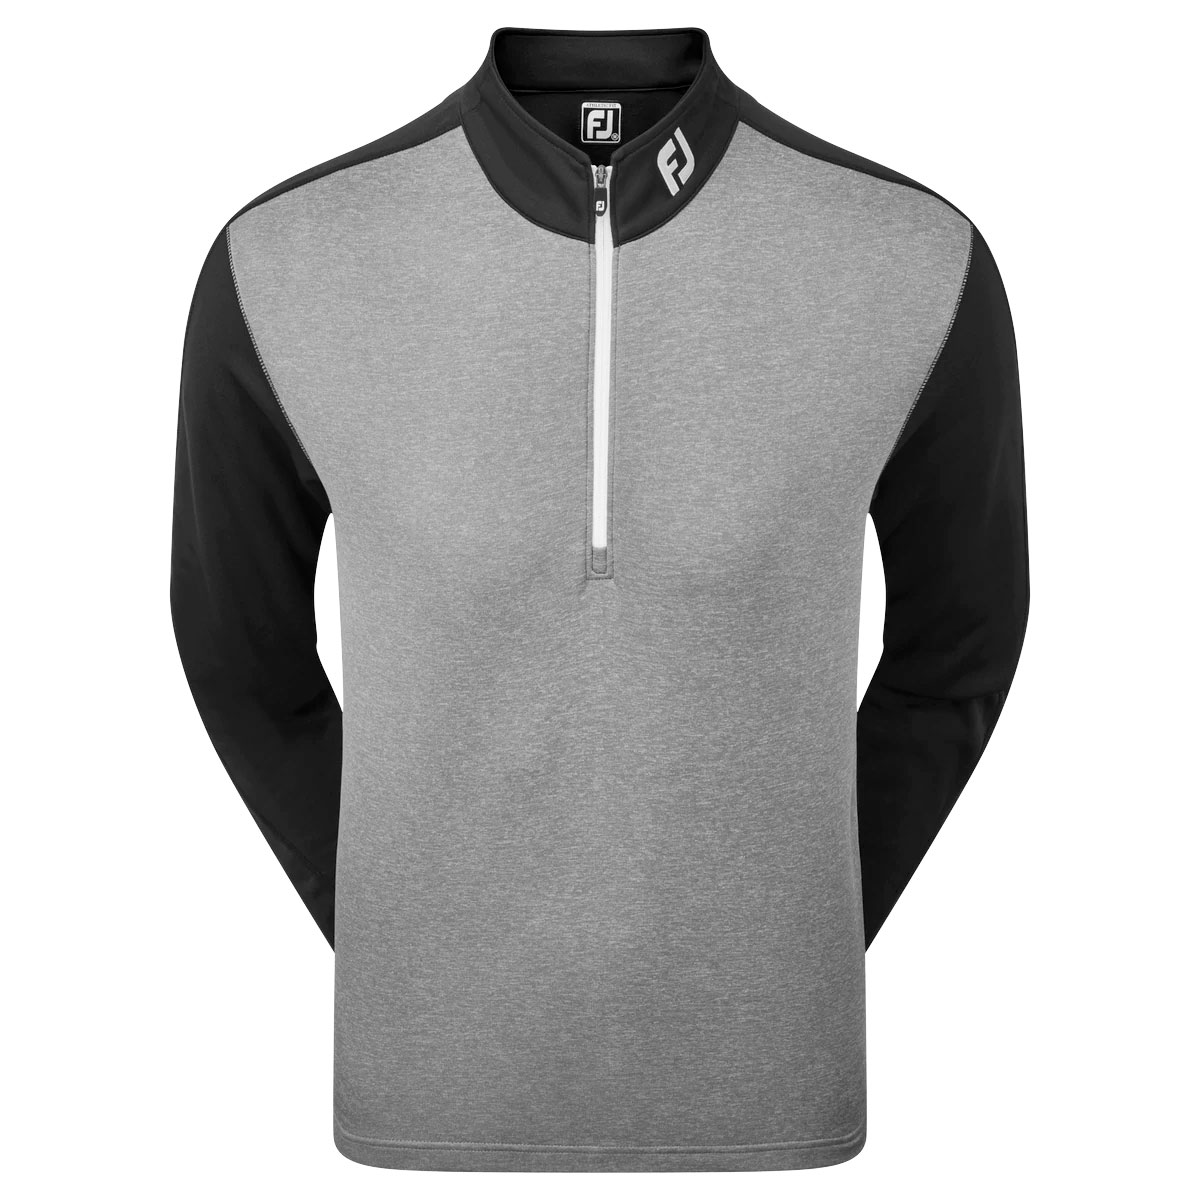 FootJoy Heather Colour Block Chill-Out Mens Golf Pullover  - Black/Heather Coal